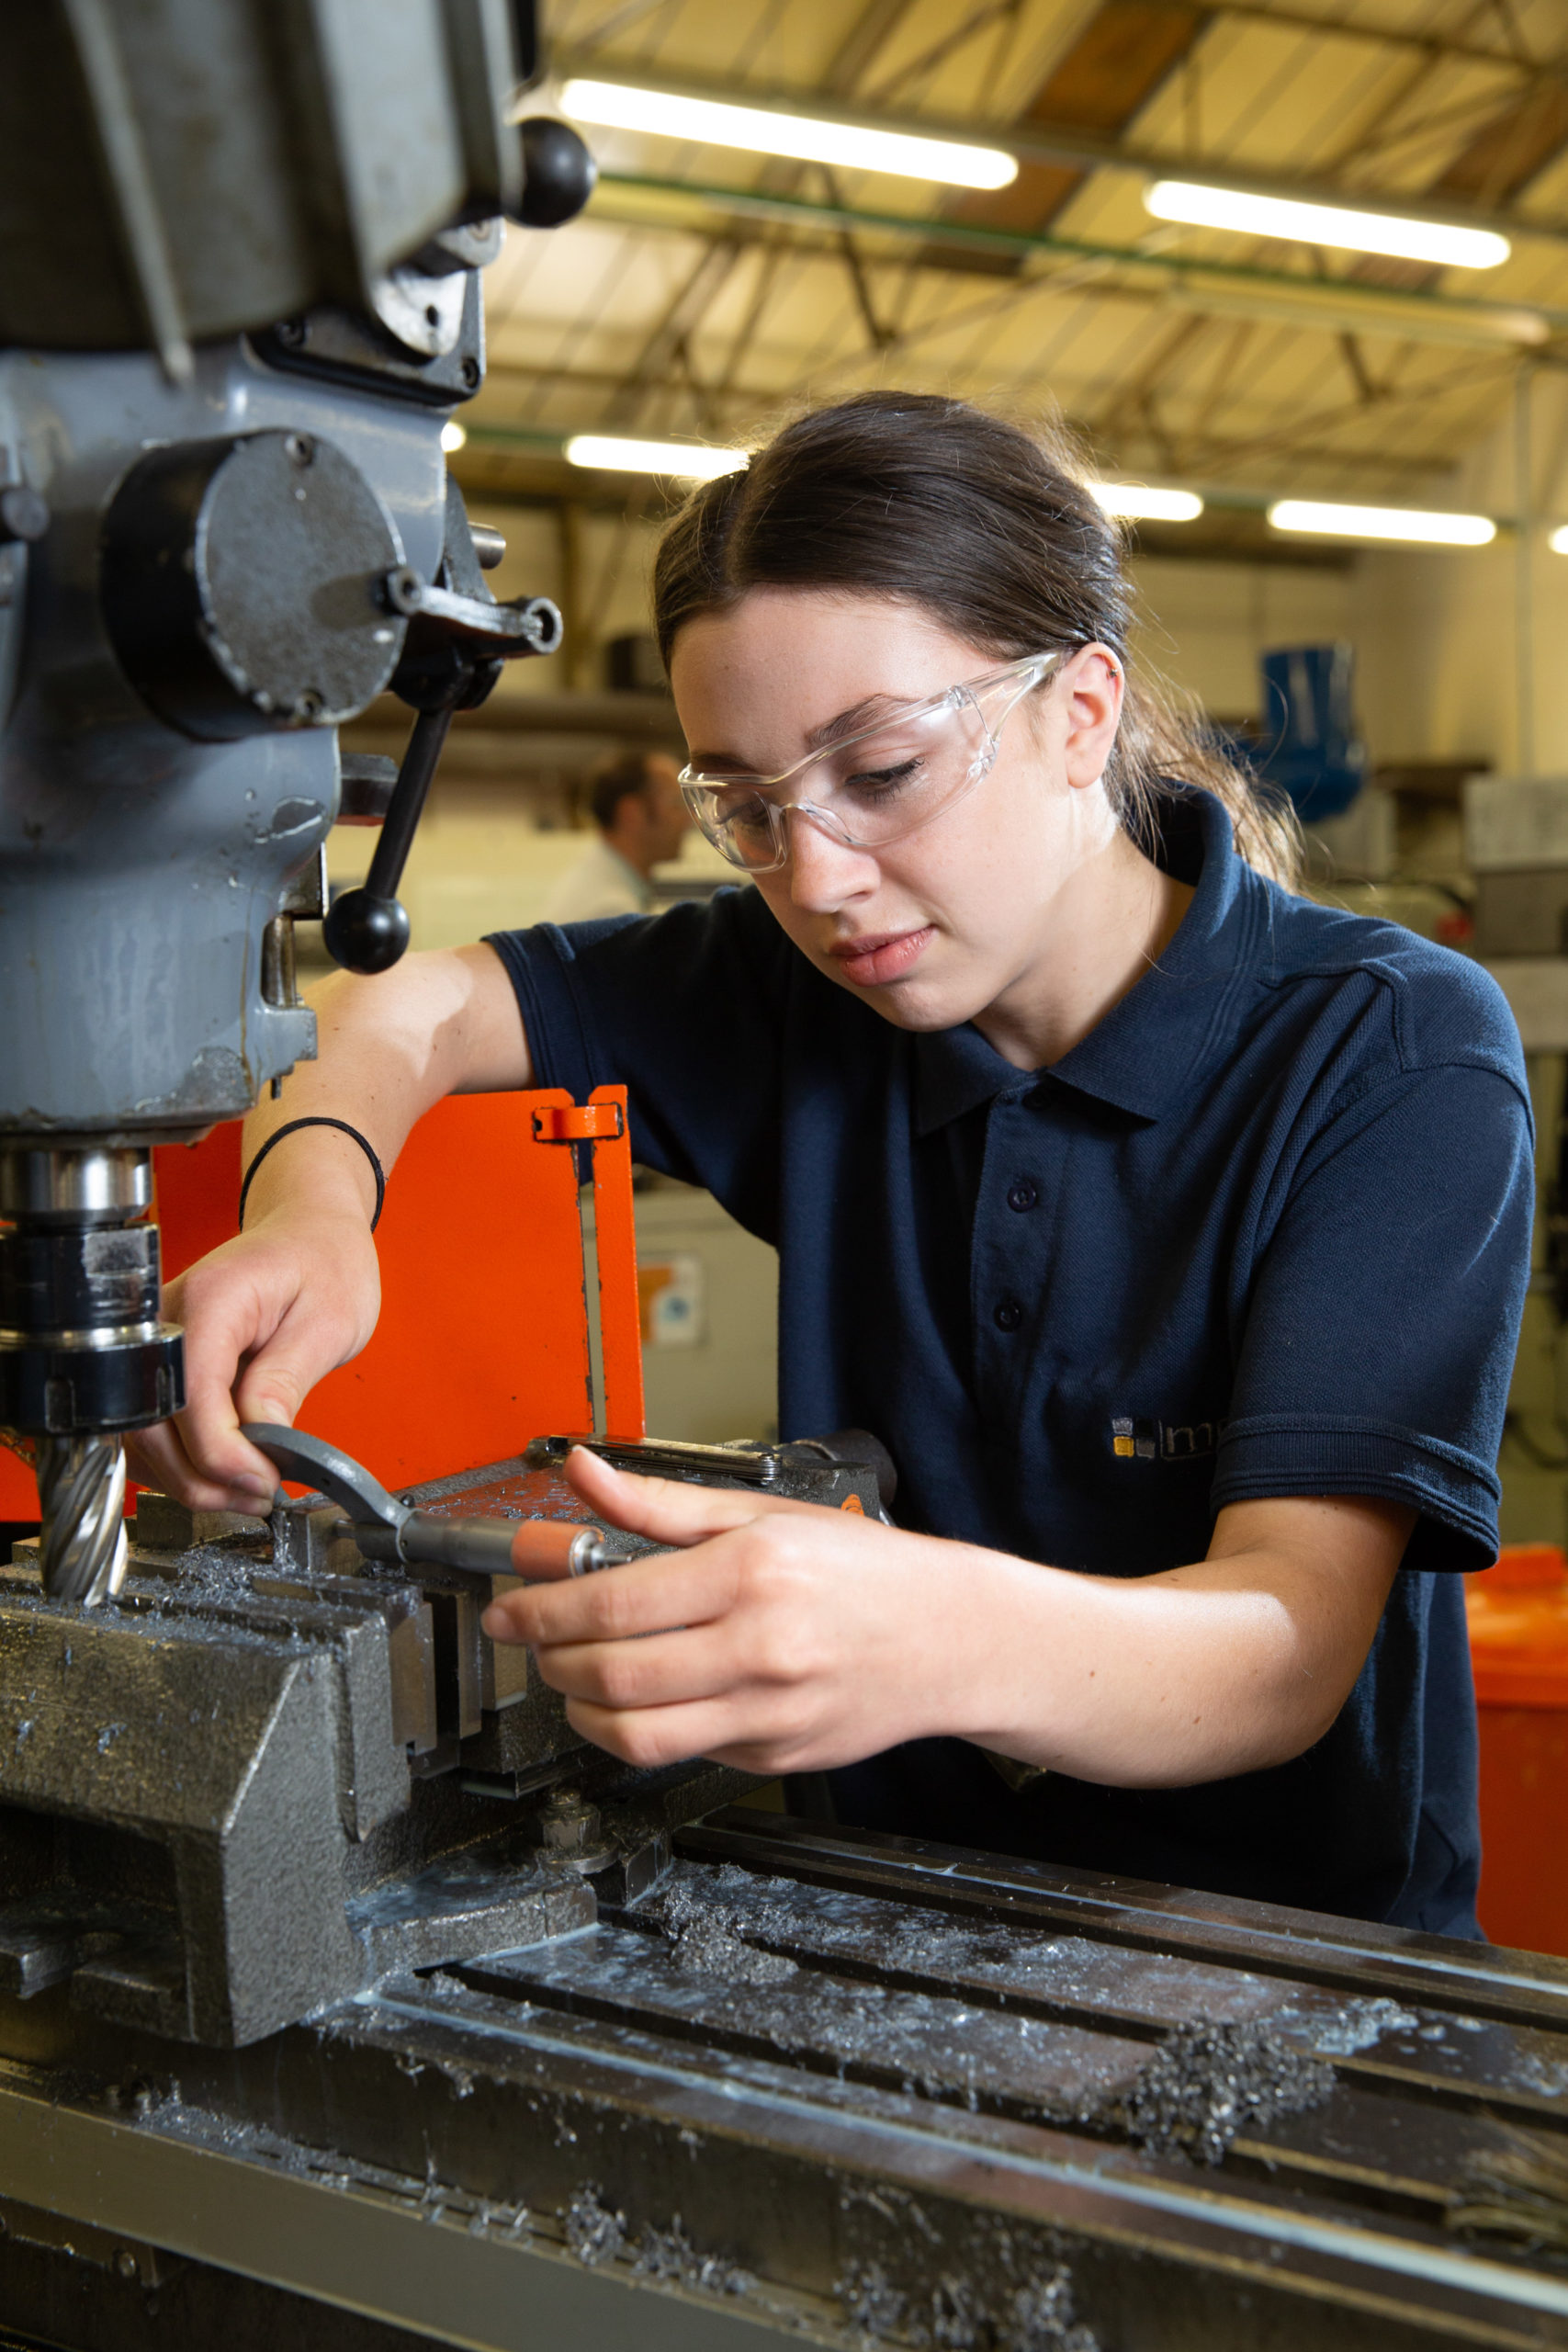 Engineering apprentice inspecting a machined part